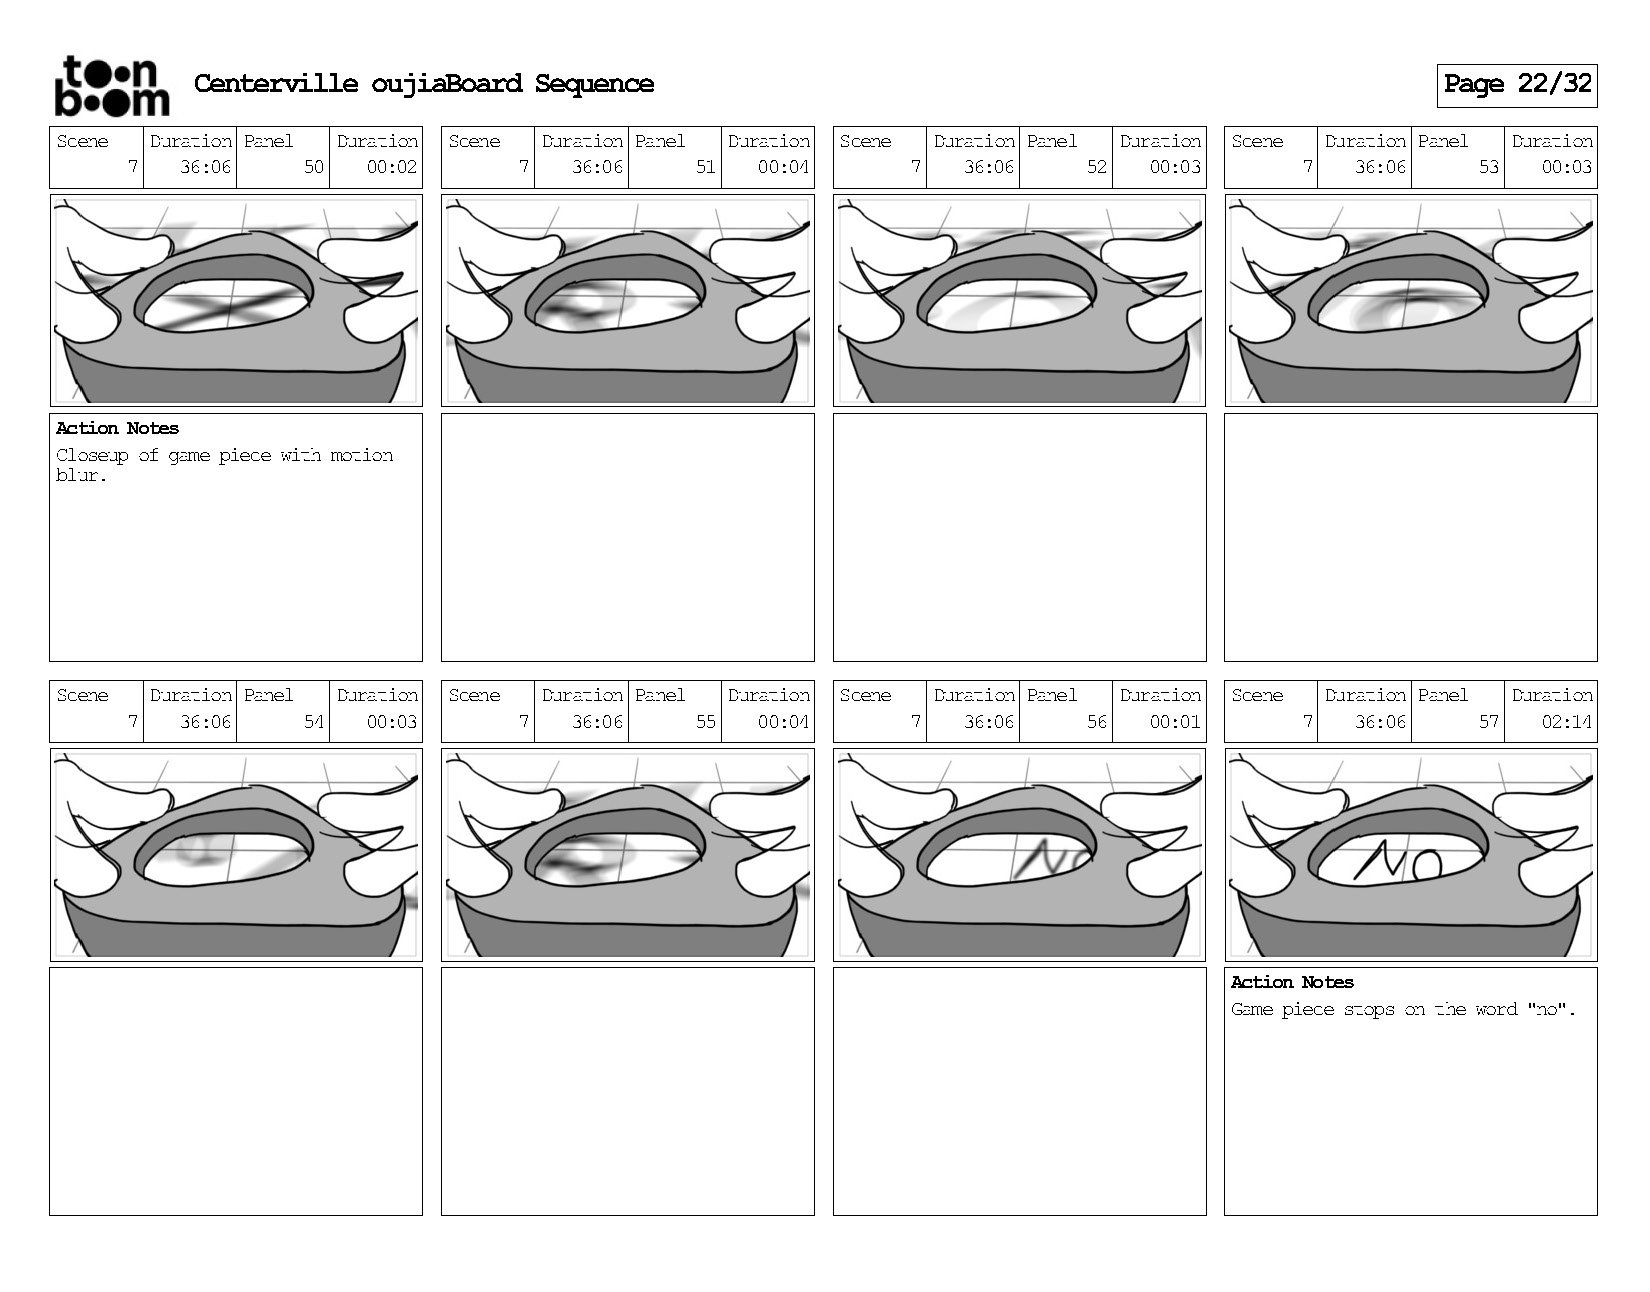 Centerville_oujiaBoard_Sequence_Page_23.jpg